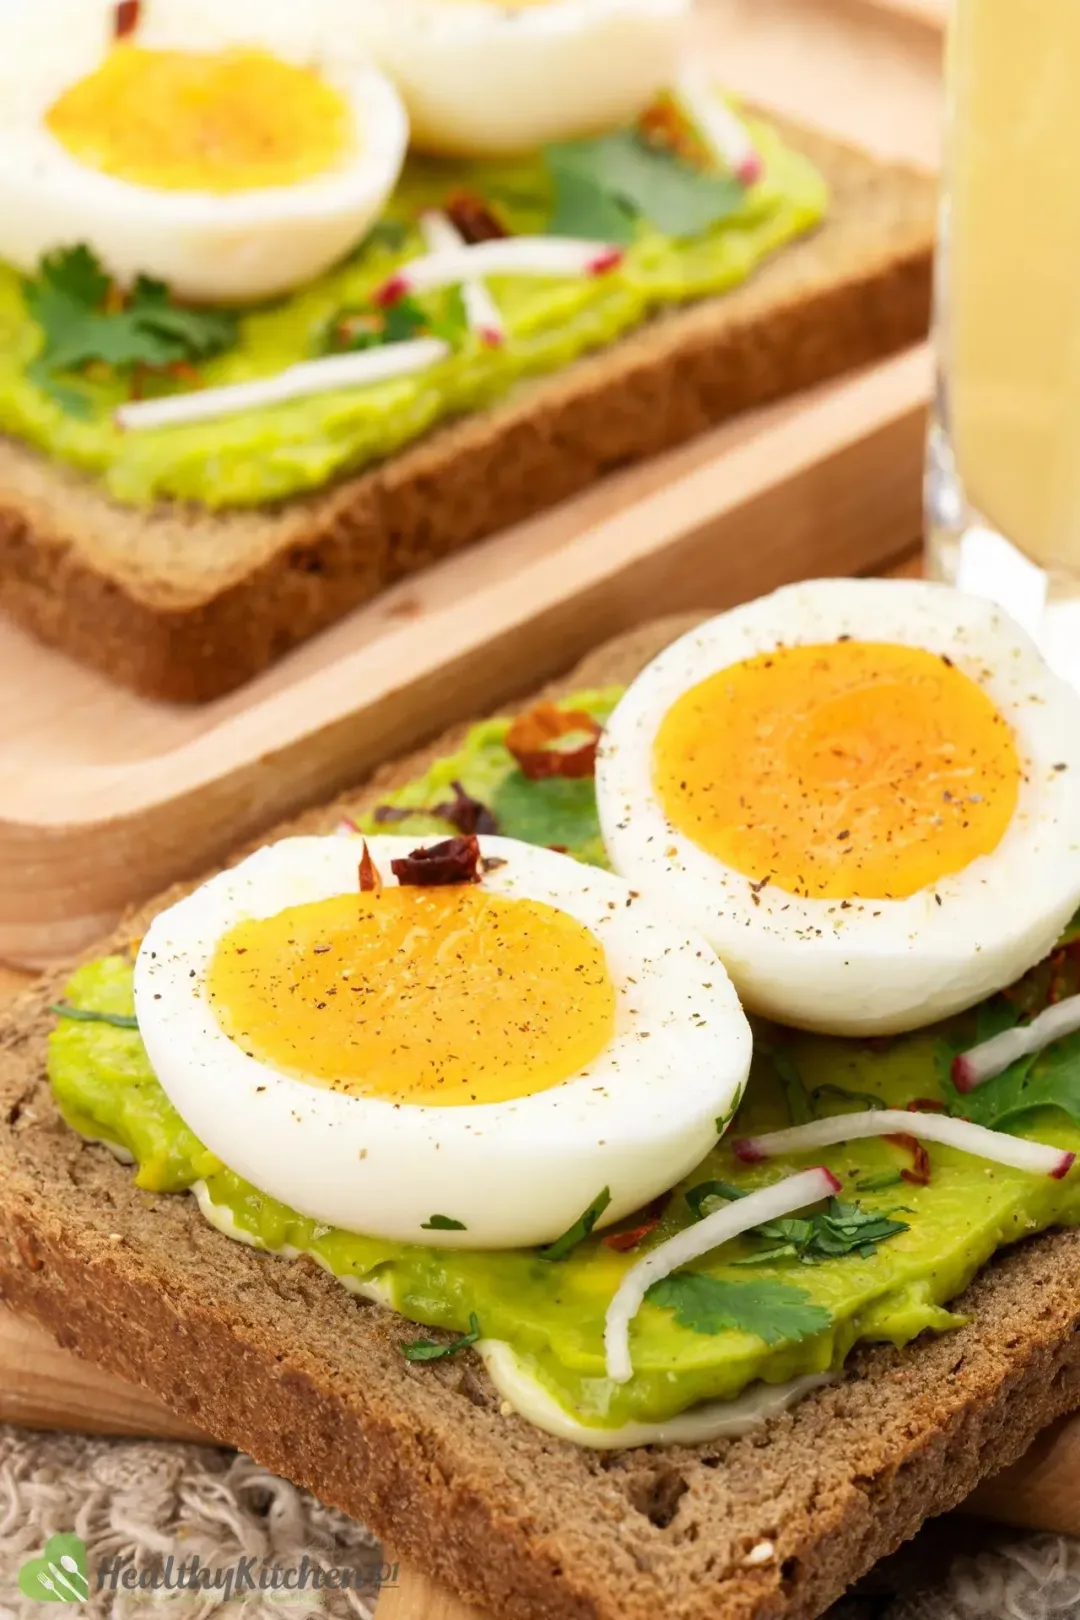 A piece of avocado toast with two slices of boiled egg on top, garnished with dried chili flakes